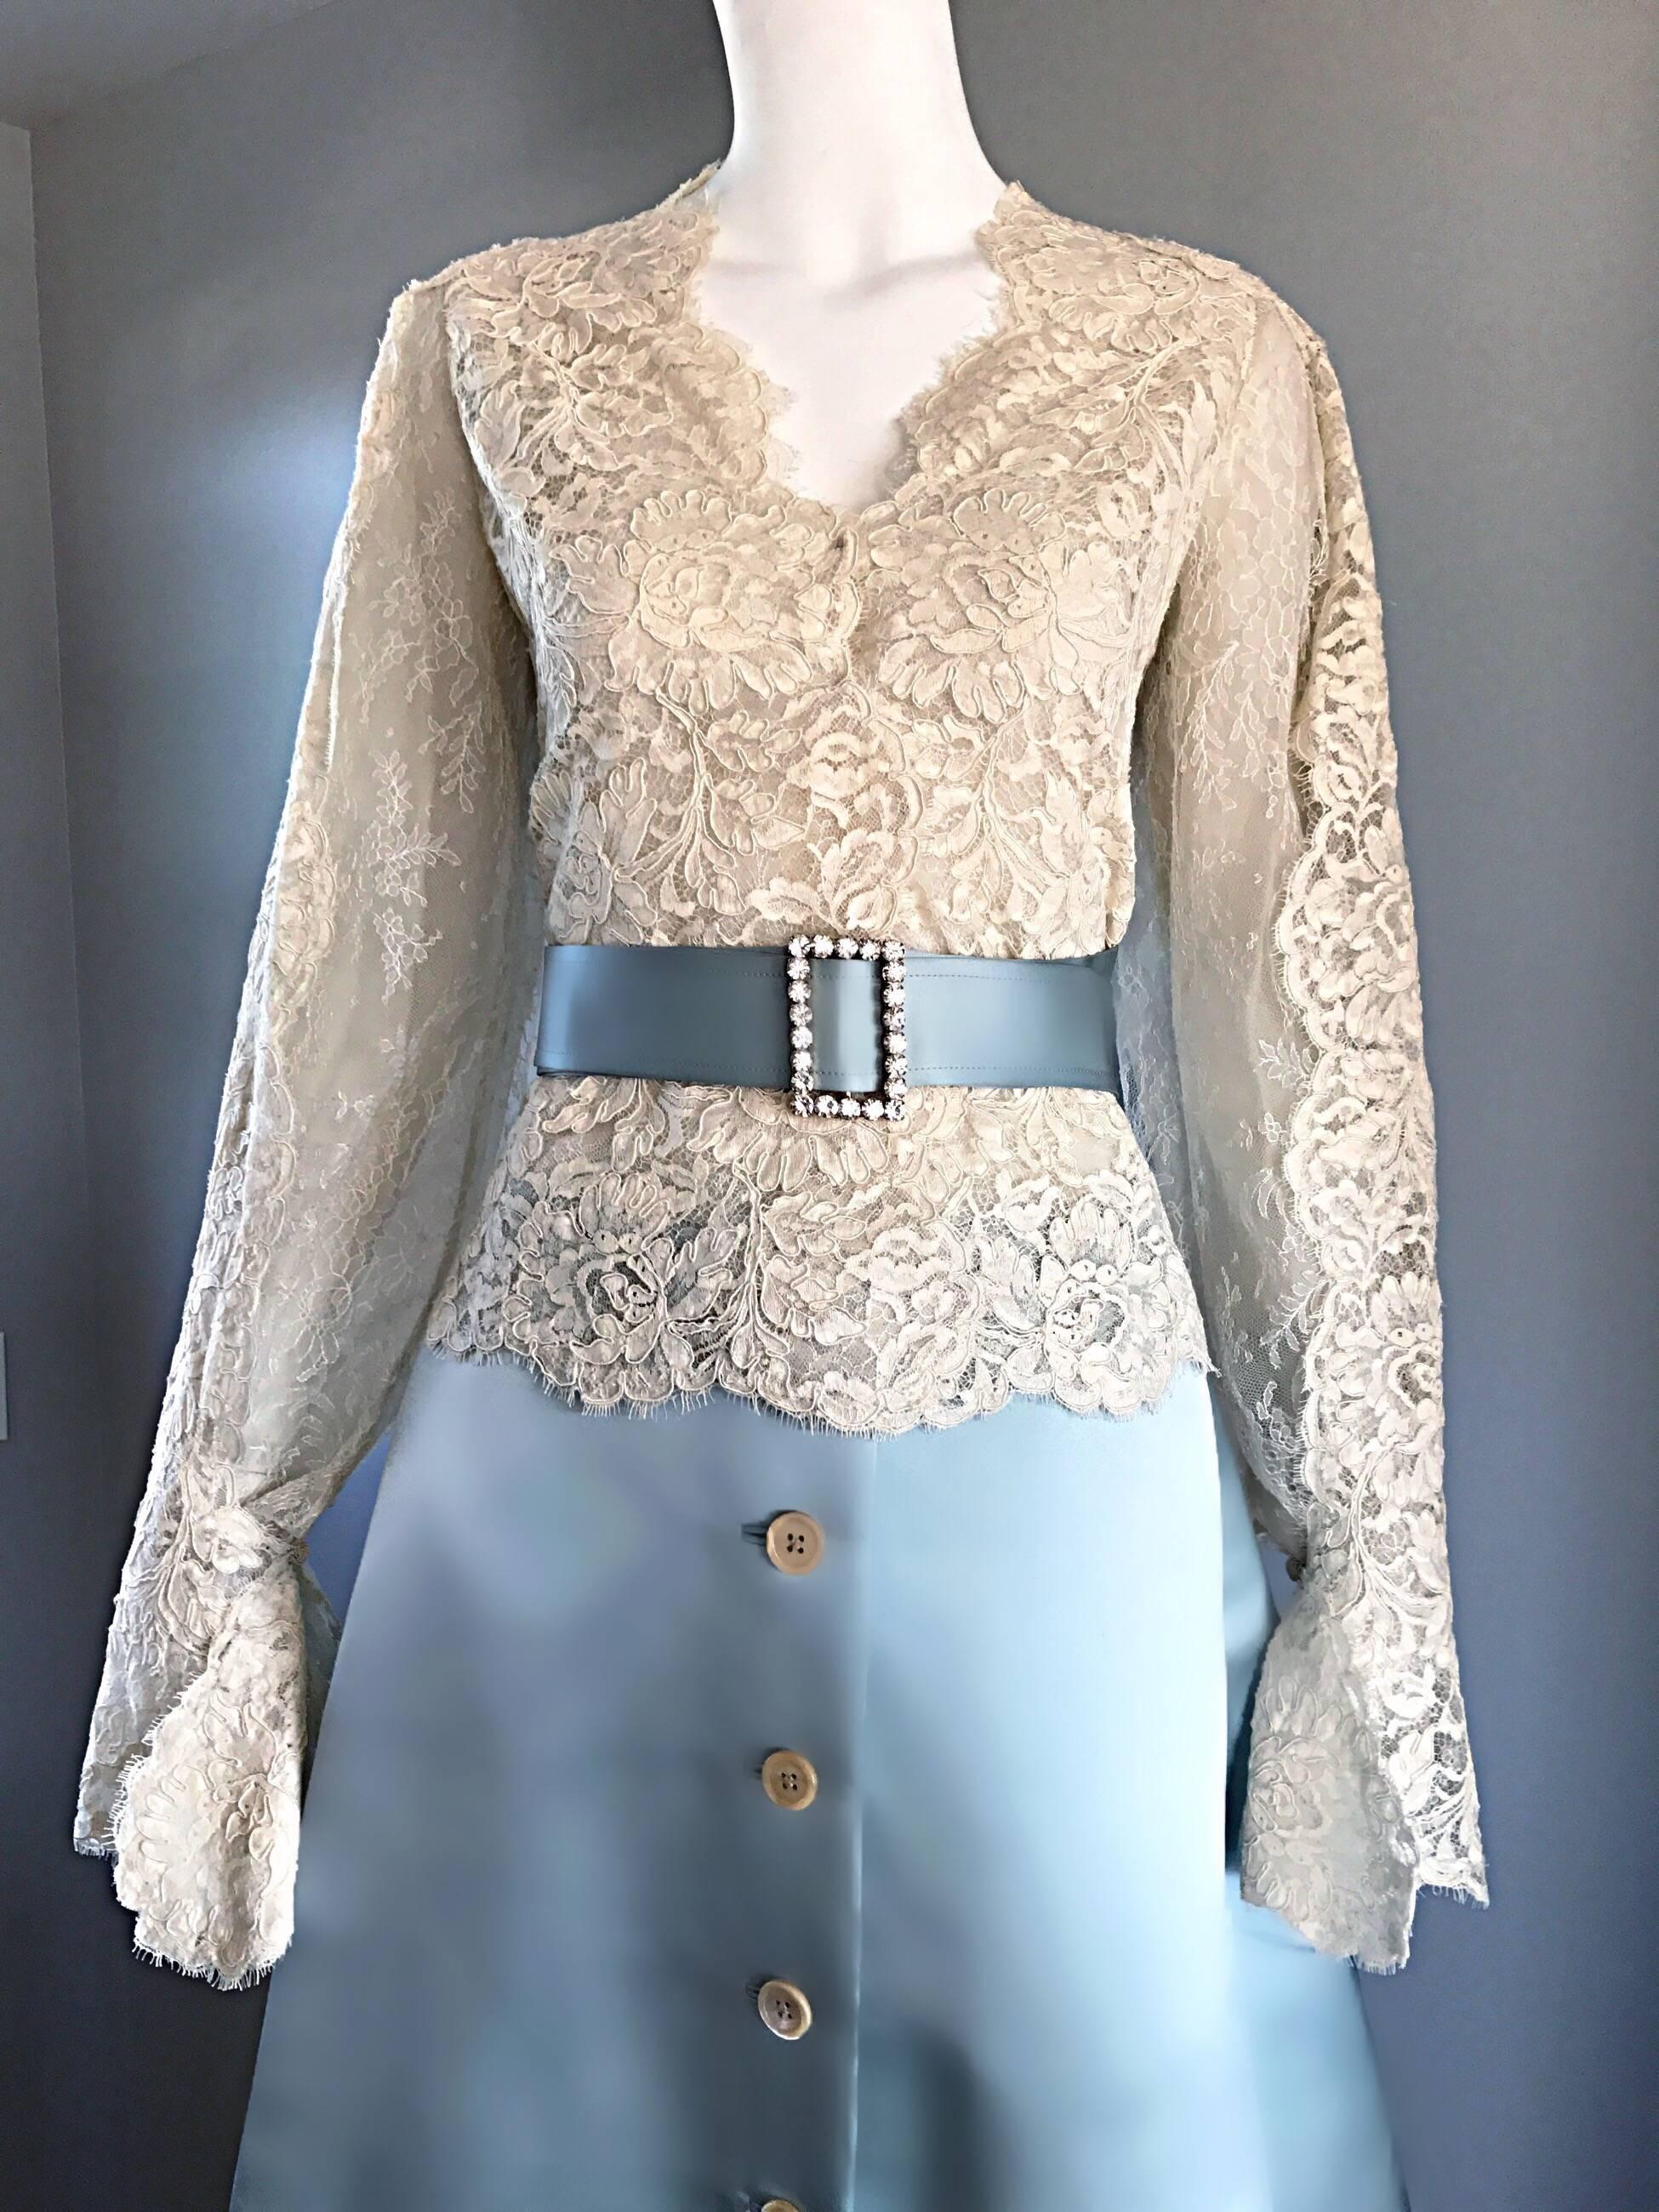 Simply exquisite vintage 70s BILL BLASS Couture three piece dress! This sensational gem looks absolutely amazing on! Features a demi couture hand-sewn ivory white chantily French lace blouse. Hidden snaps up the front. Intricate double ply lace